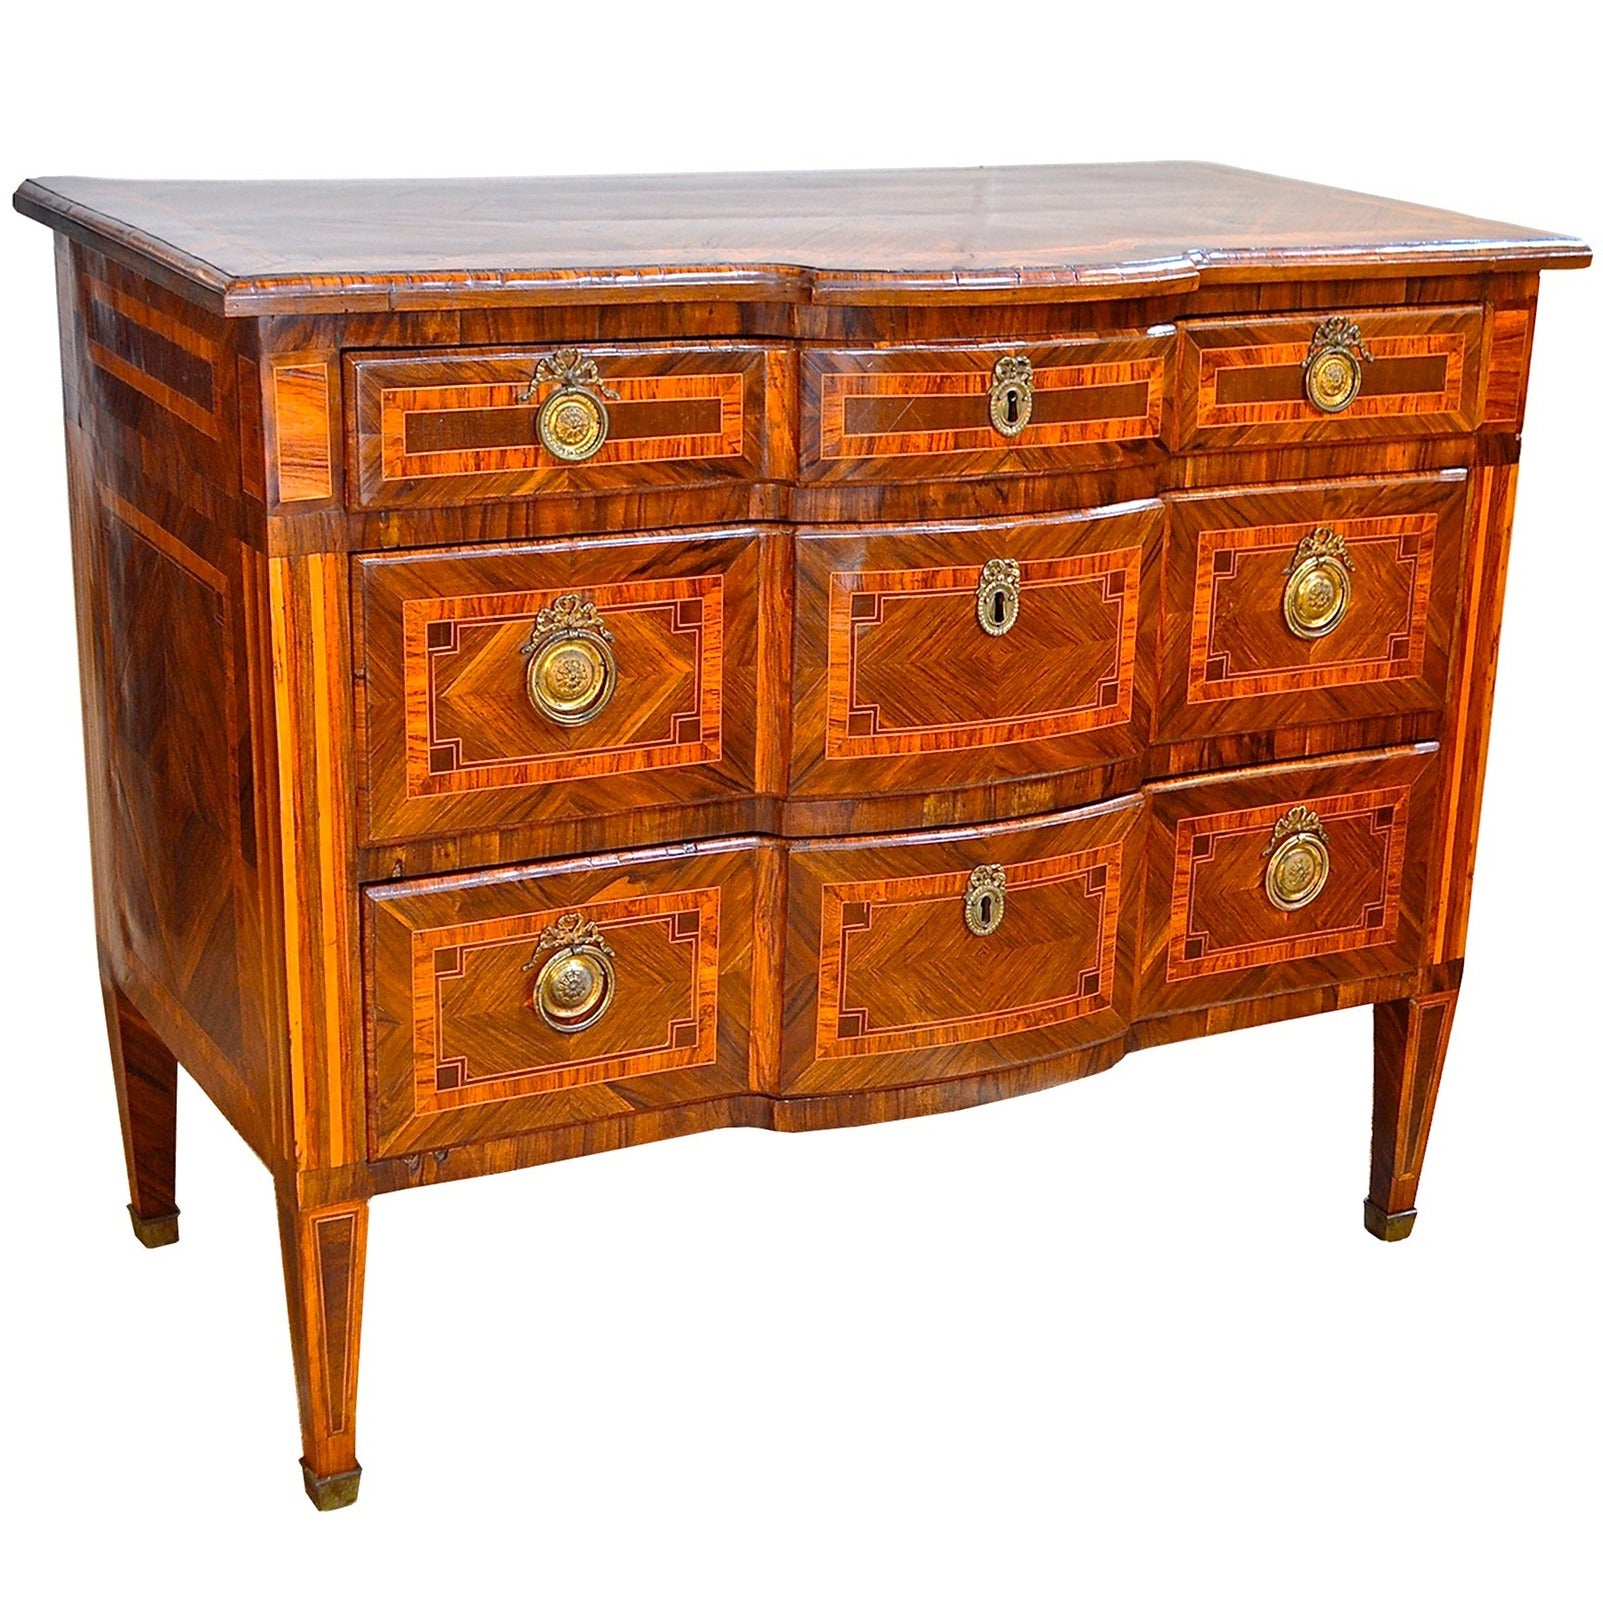 Stately and regal late 18th century neoclassical commode of rosewood. Inlays of tulip and birch are present along with the magnificent rosewood. Secondary woods of pine and walnut. Having masterfully inlaid marquetry work throughout, the simple yet